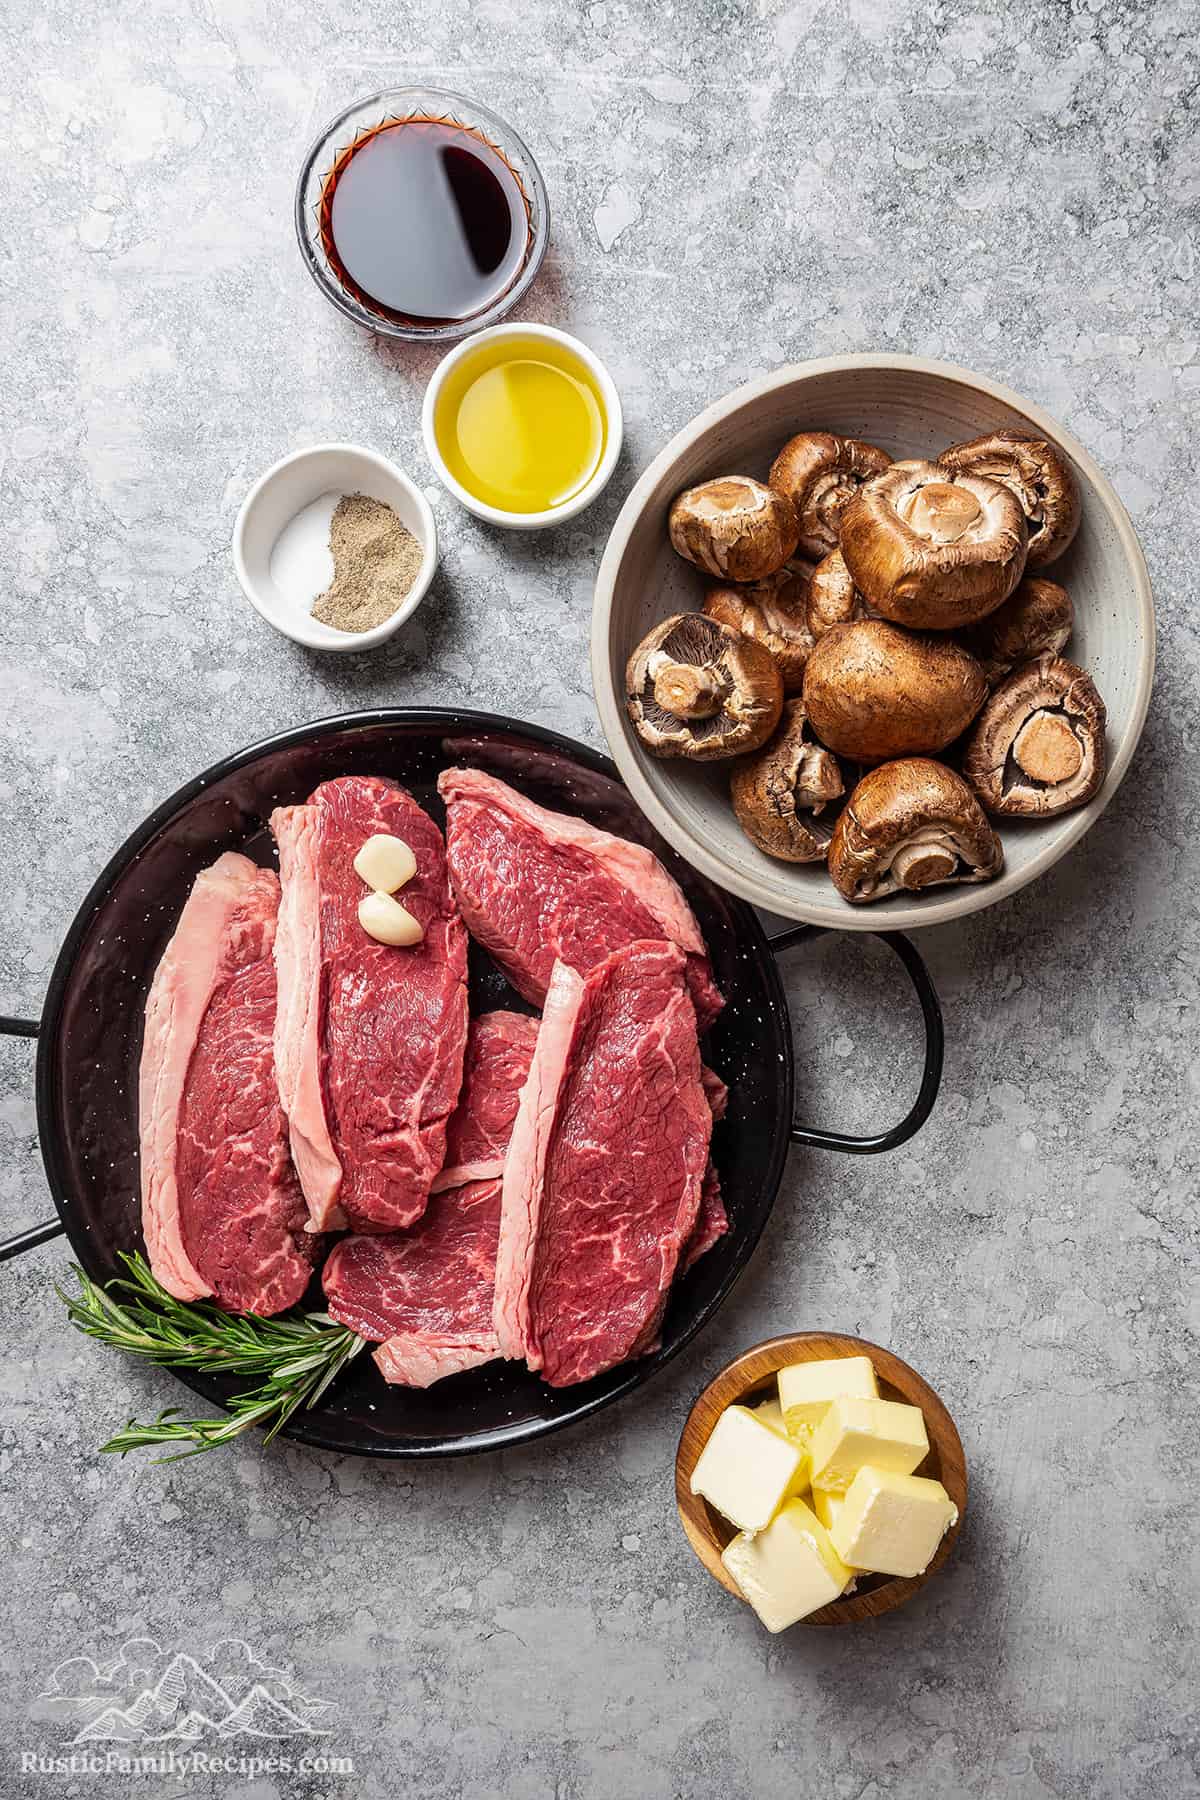 The ingredients for coulotte steak with mushroom sauce.